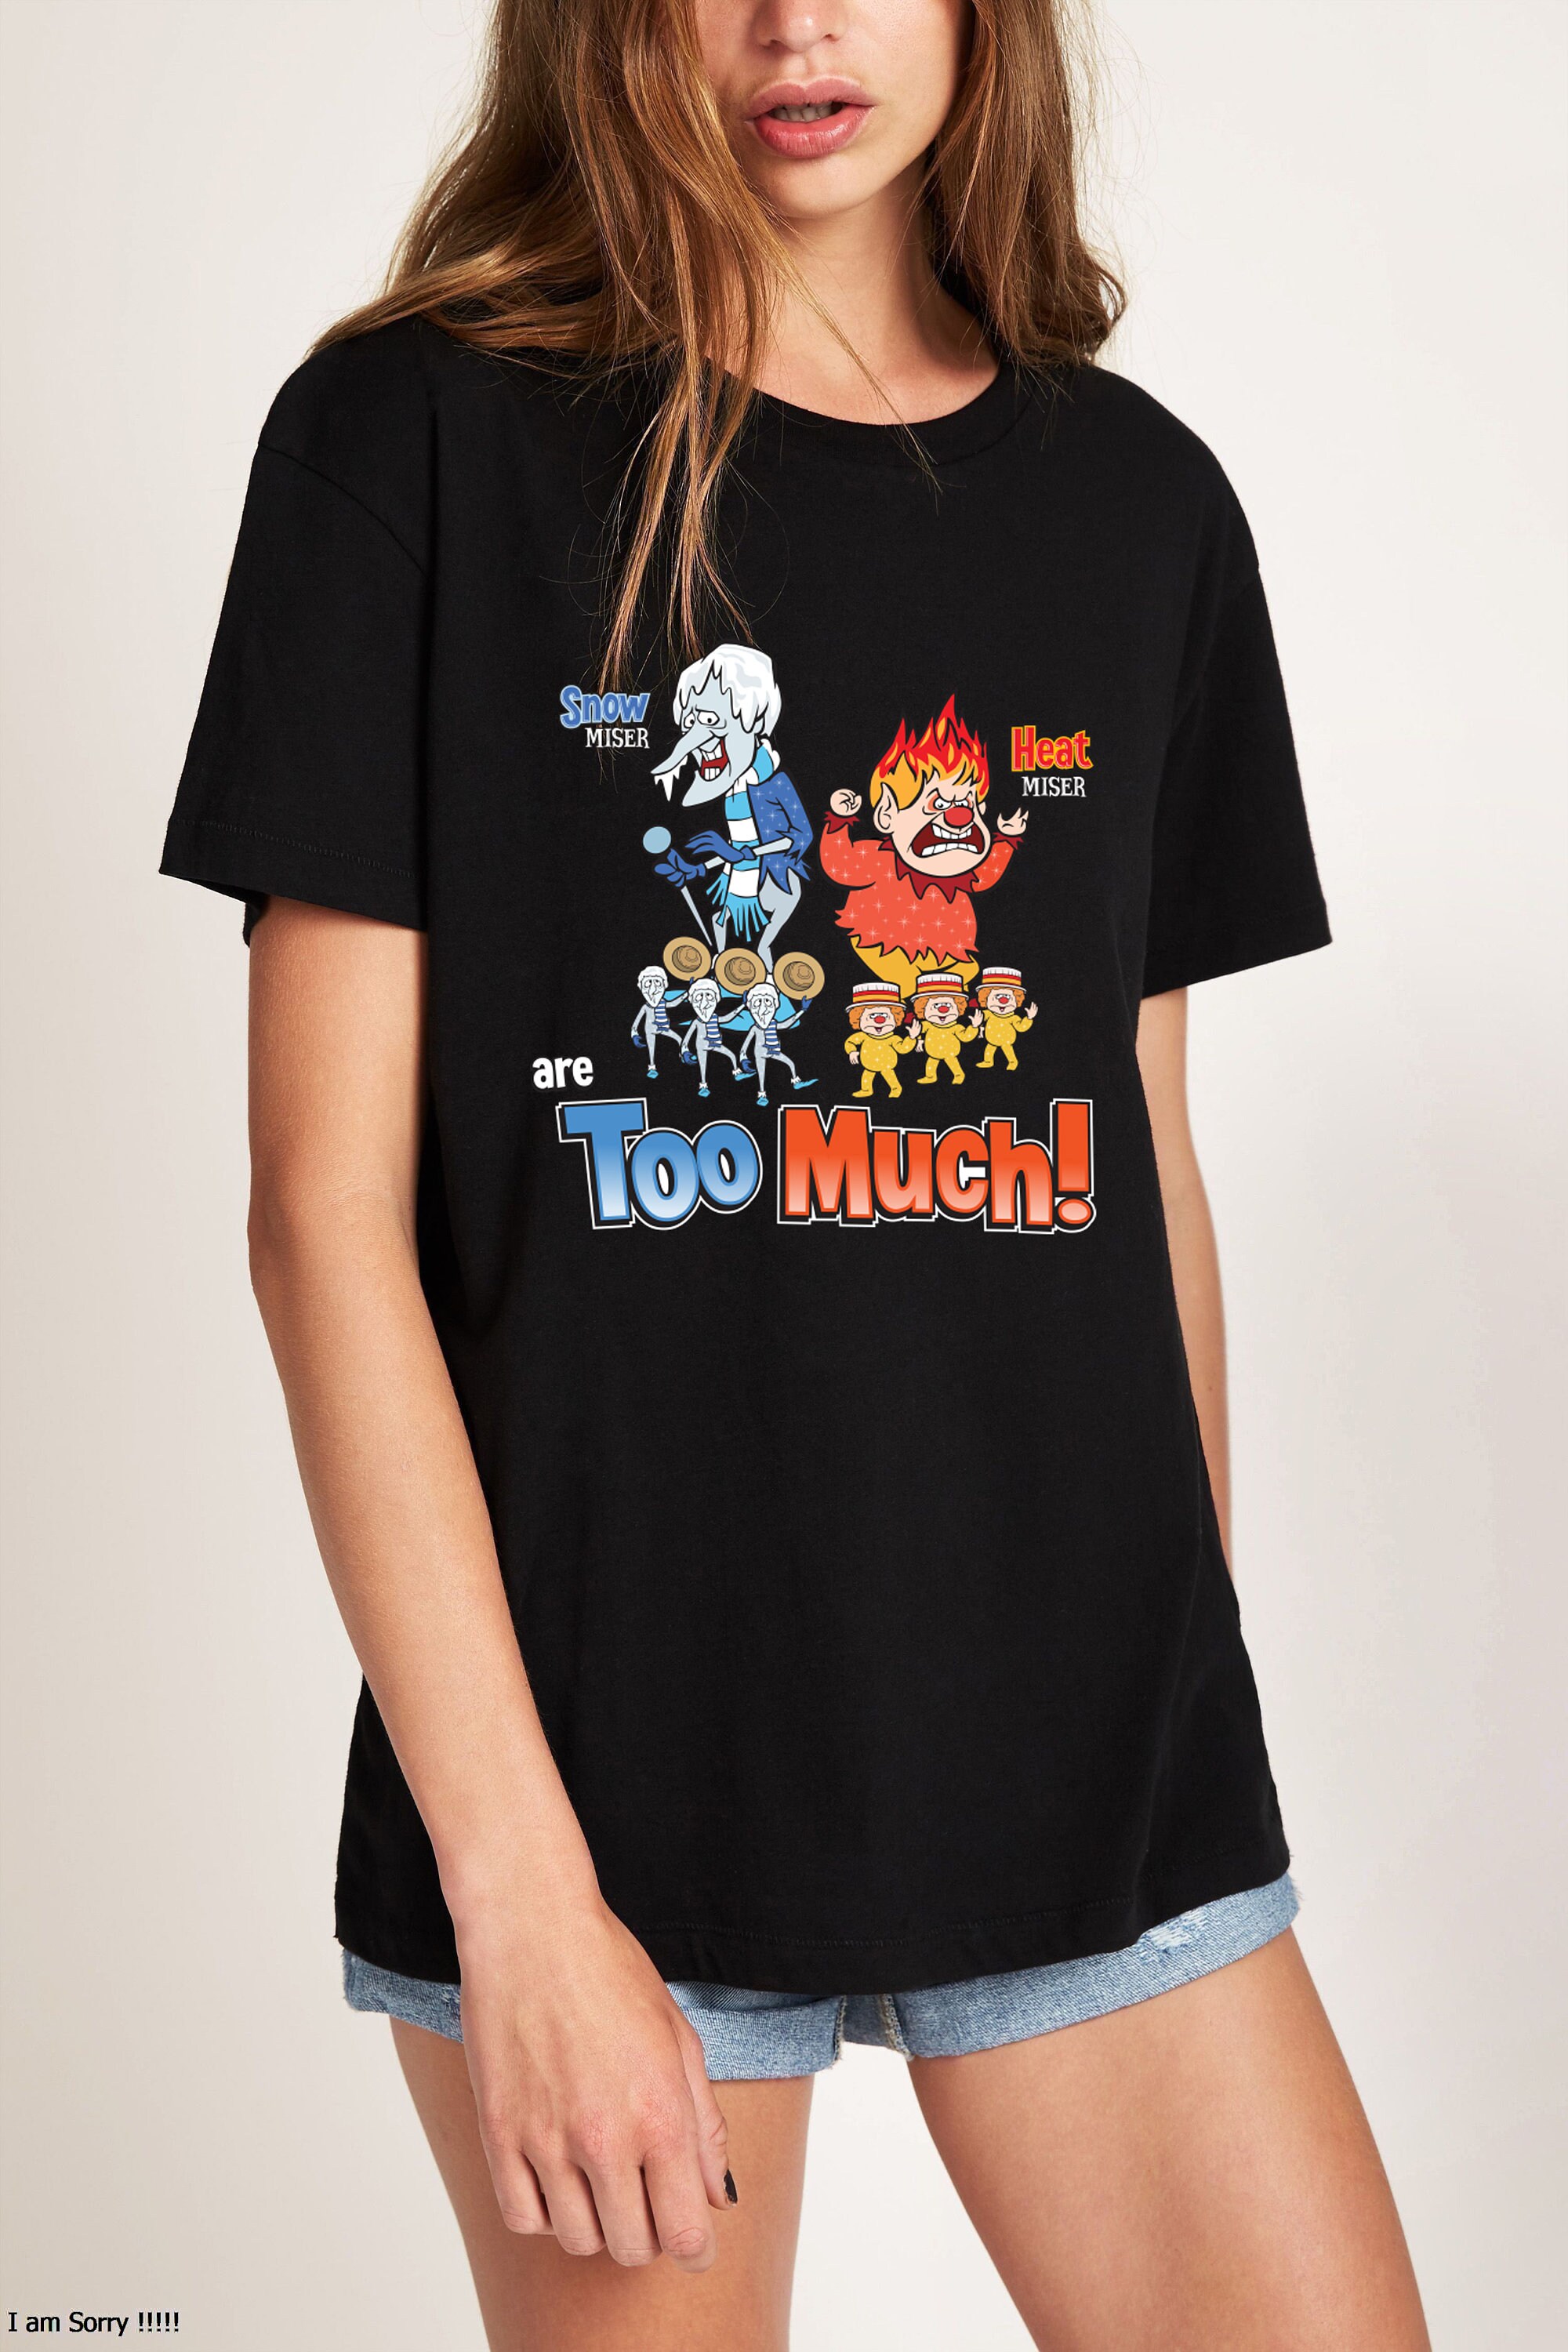 Discover Miser Brothers - Too Much! Shirt, Unisex Tee,